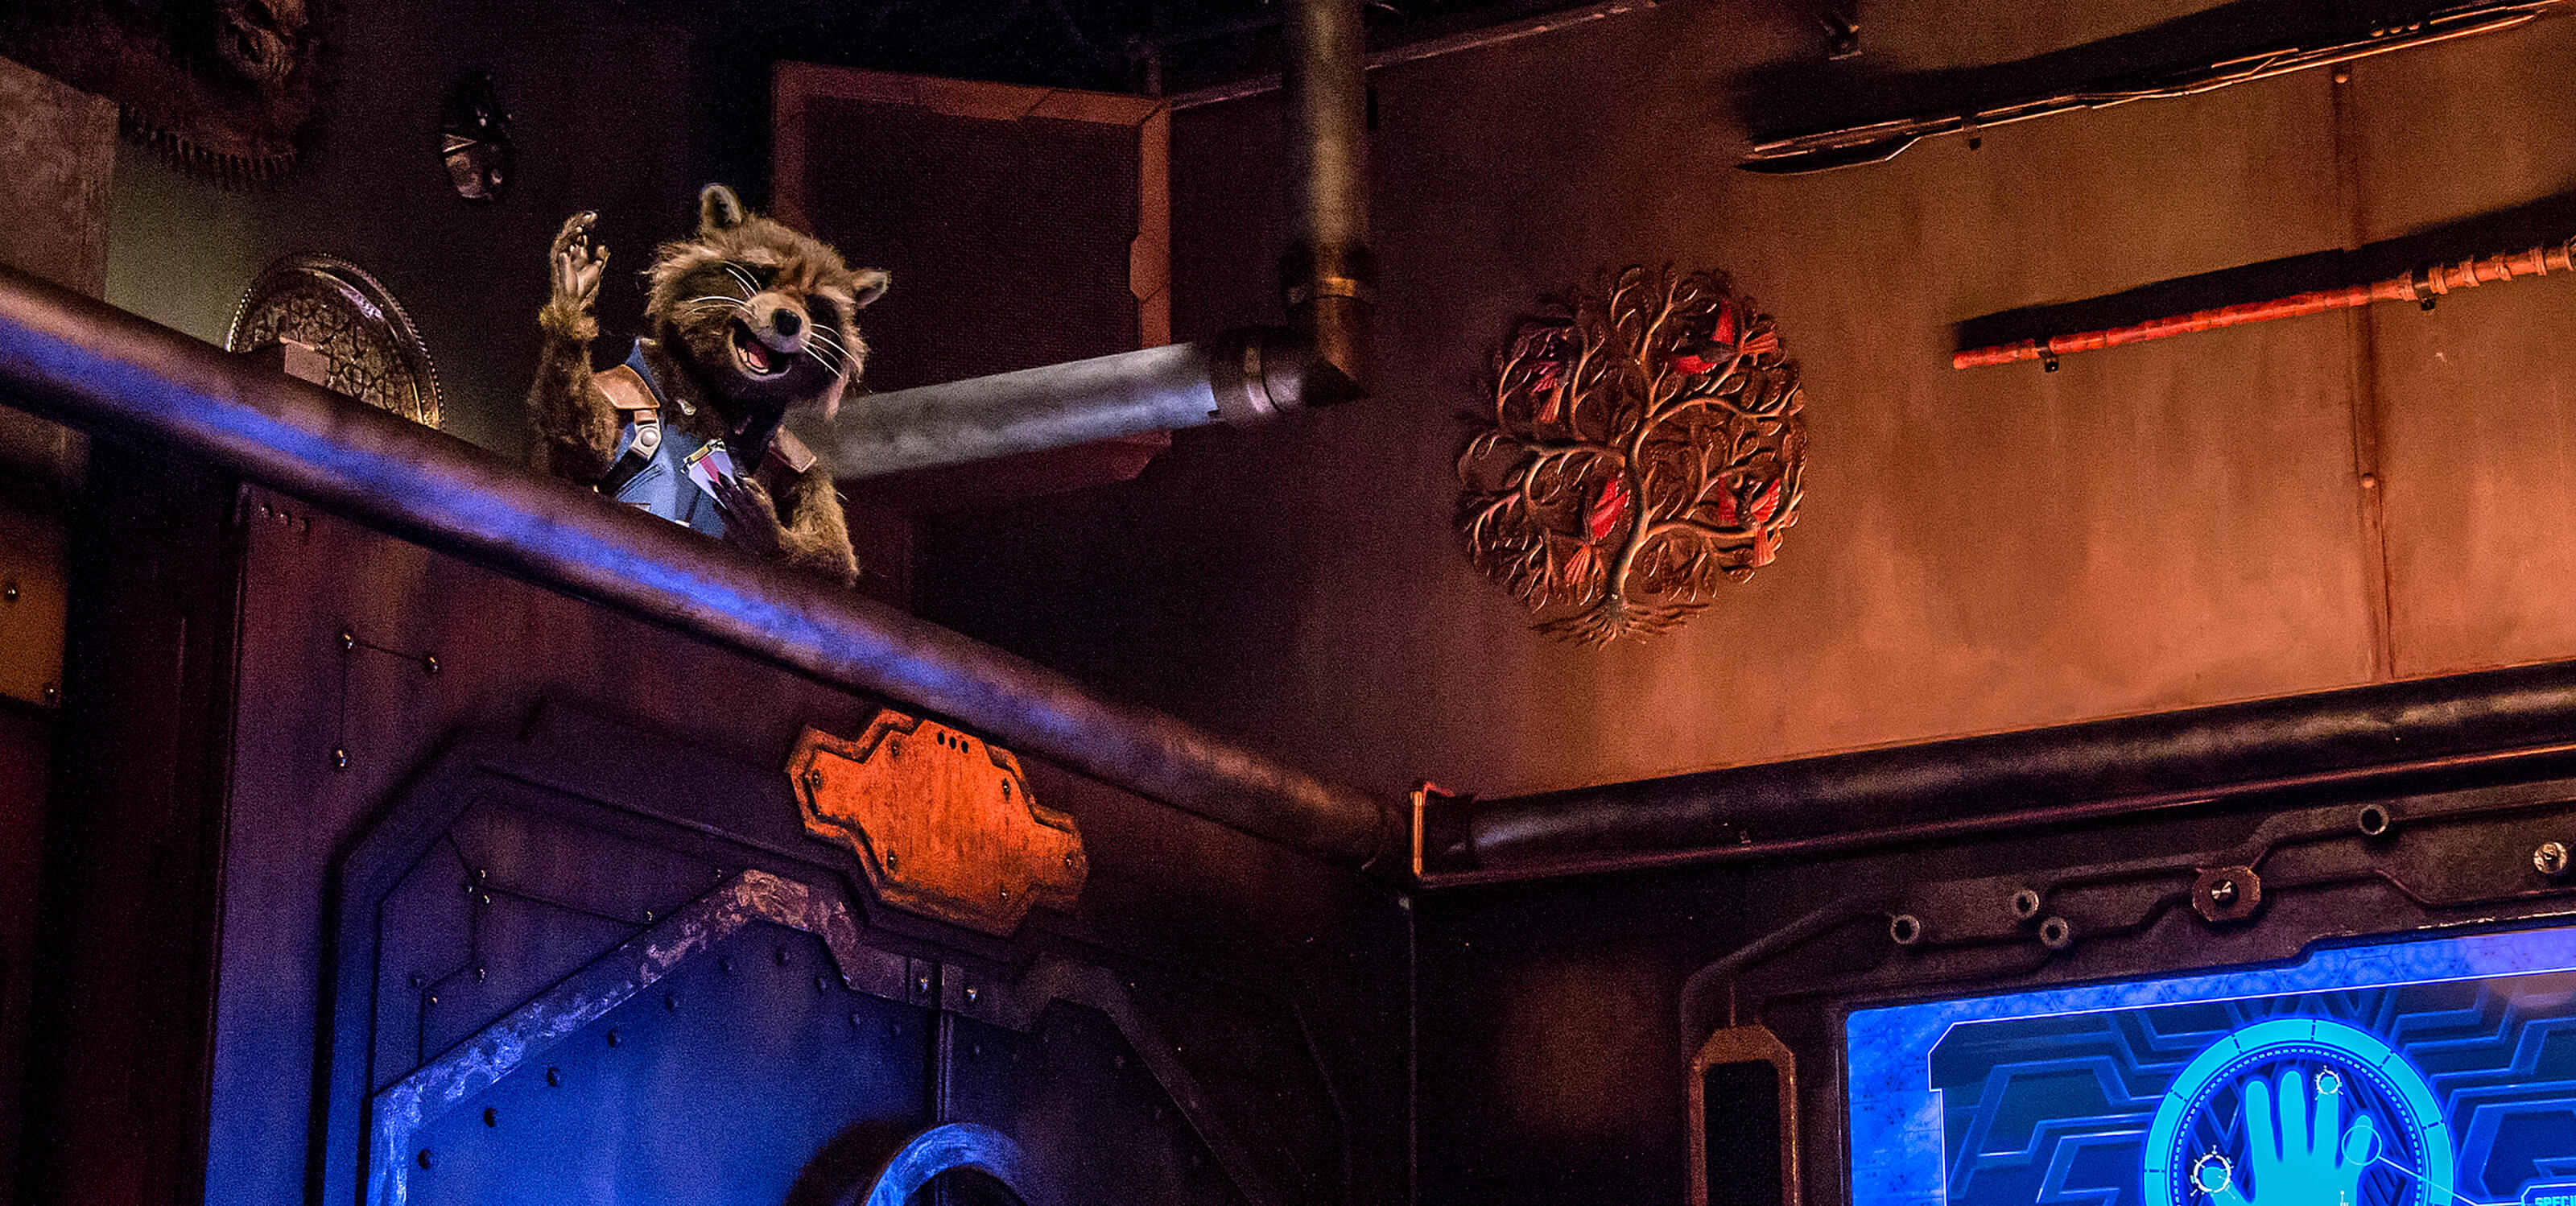 Audio-animatronic Rocket Raccoon welcomes riders to the Guardians of the Galaxy: Mission Breakout at Disney's California Adventure theme park